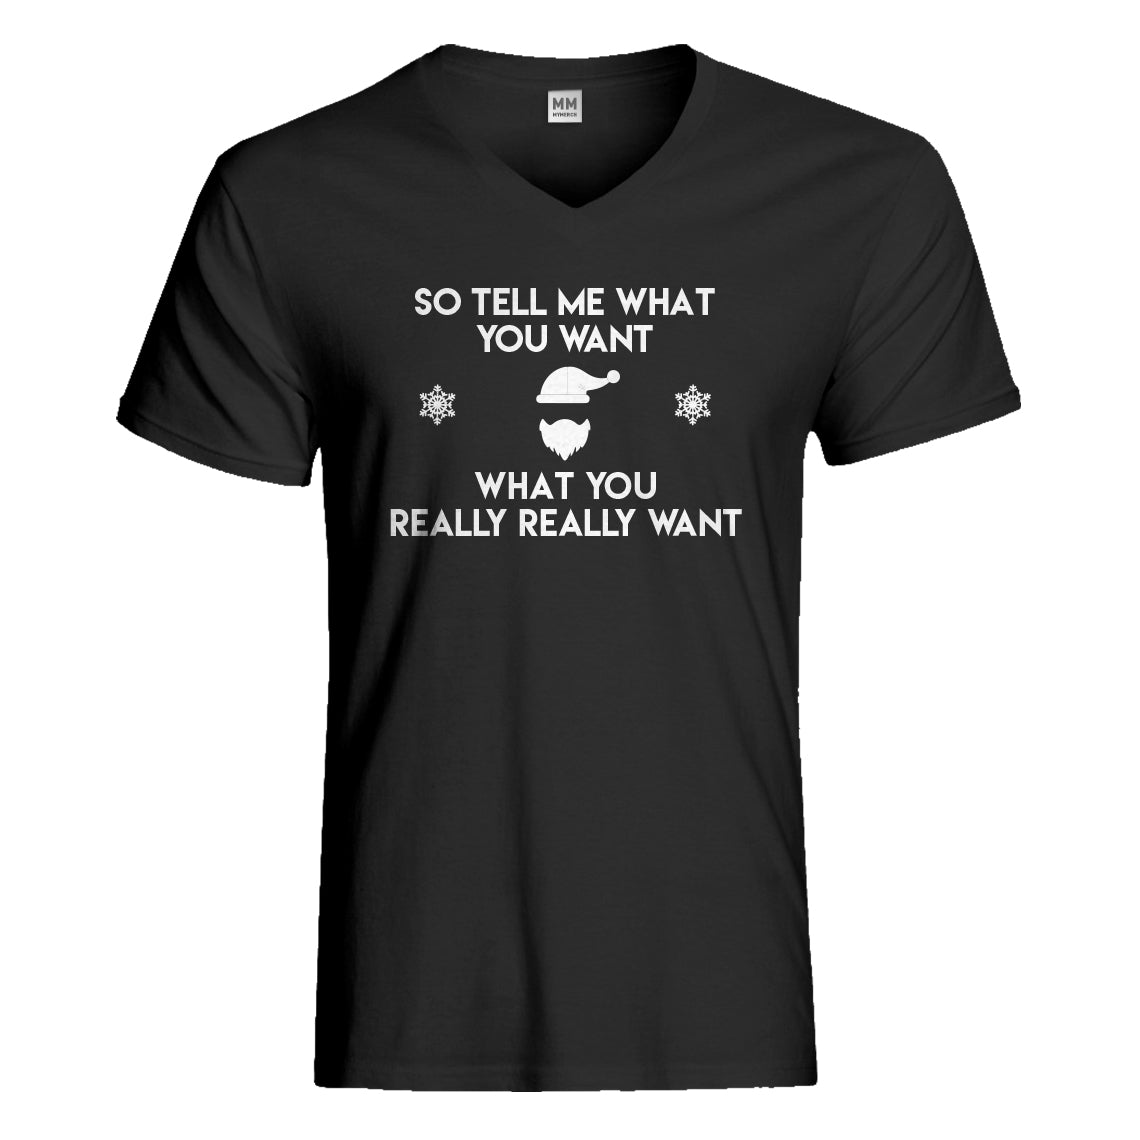 Mens Tell me what you want Vneck T-shirt